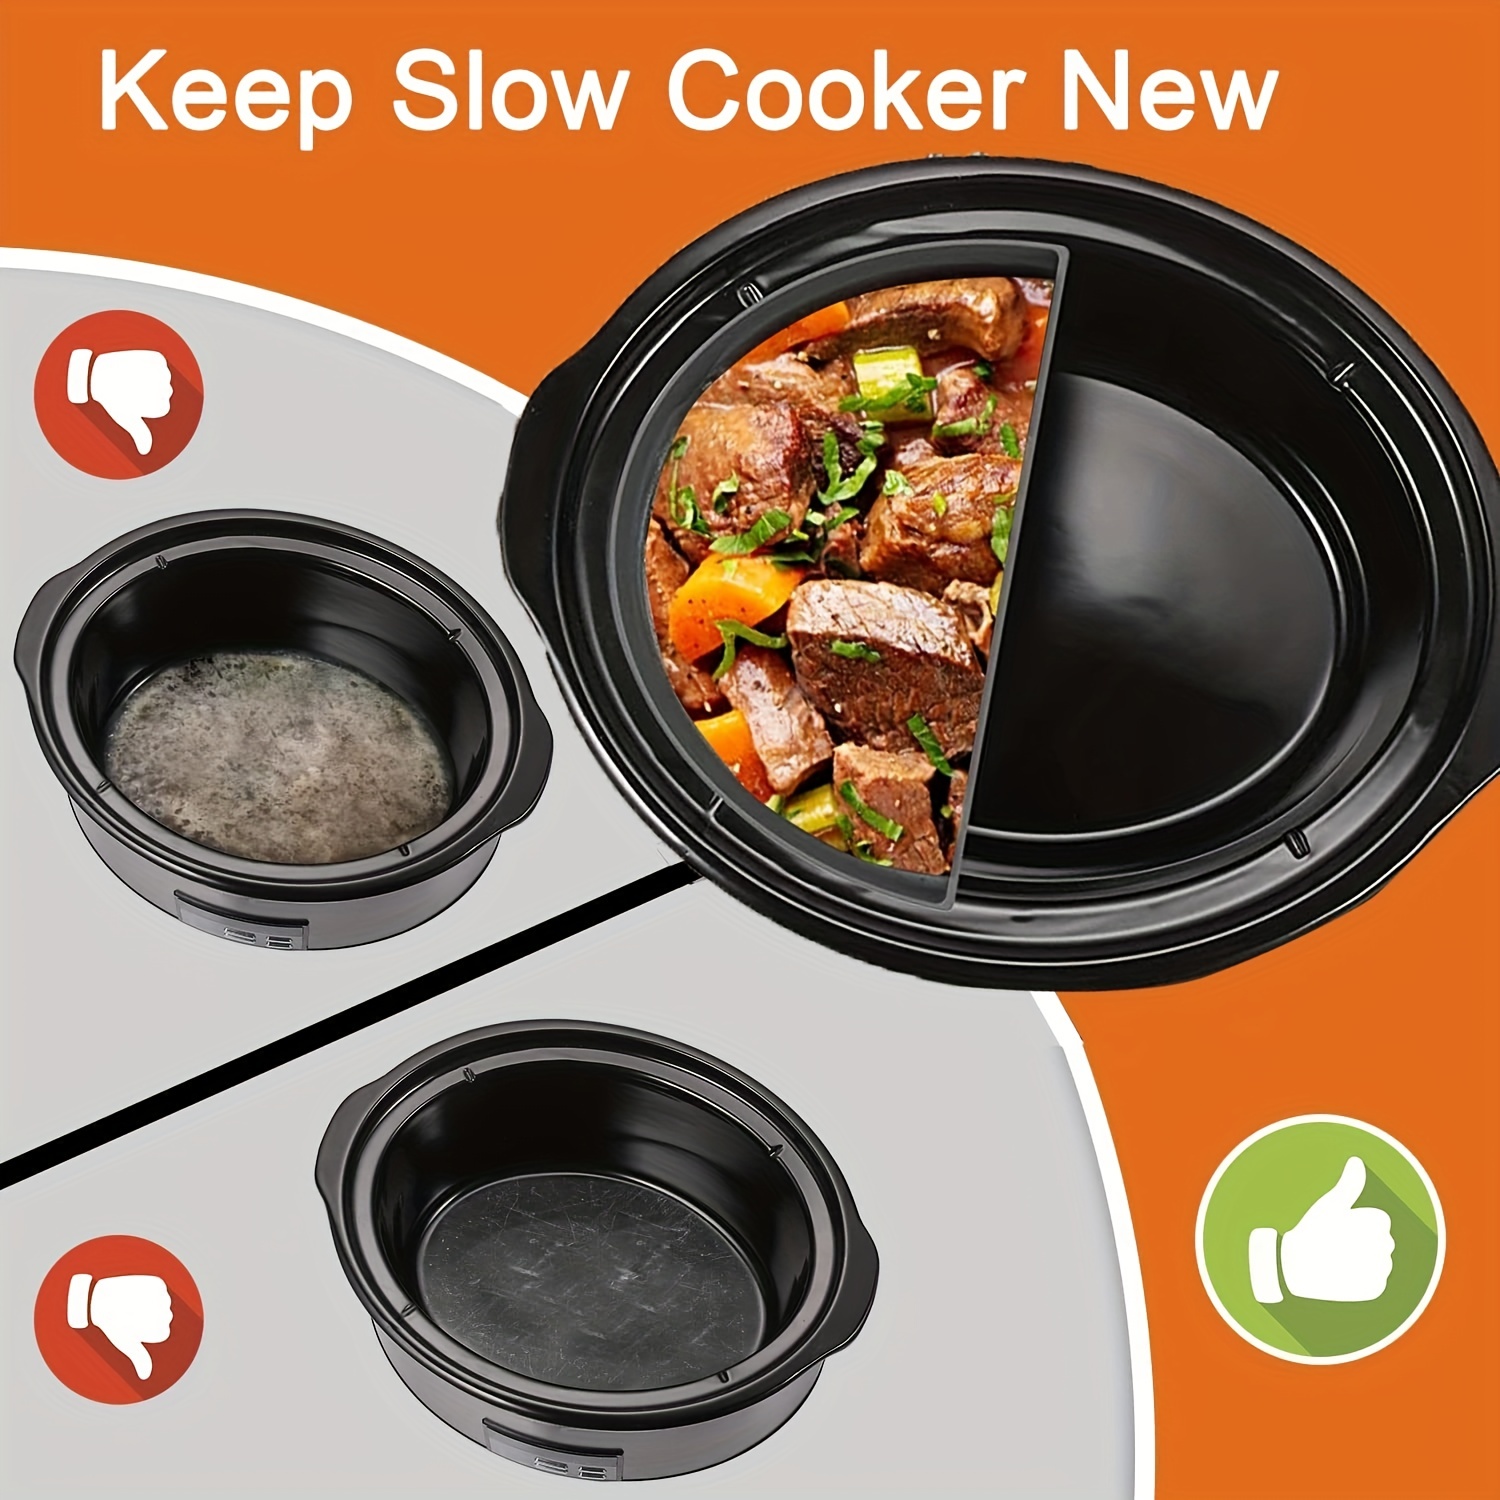 Slow Cooker Liners Fit 6-8 Quarts Crockpot, Reusable & Leakproof Cooking  Bags Large Size Crock Pot Liners, Easy Clean Bags Liners for Oval or Round